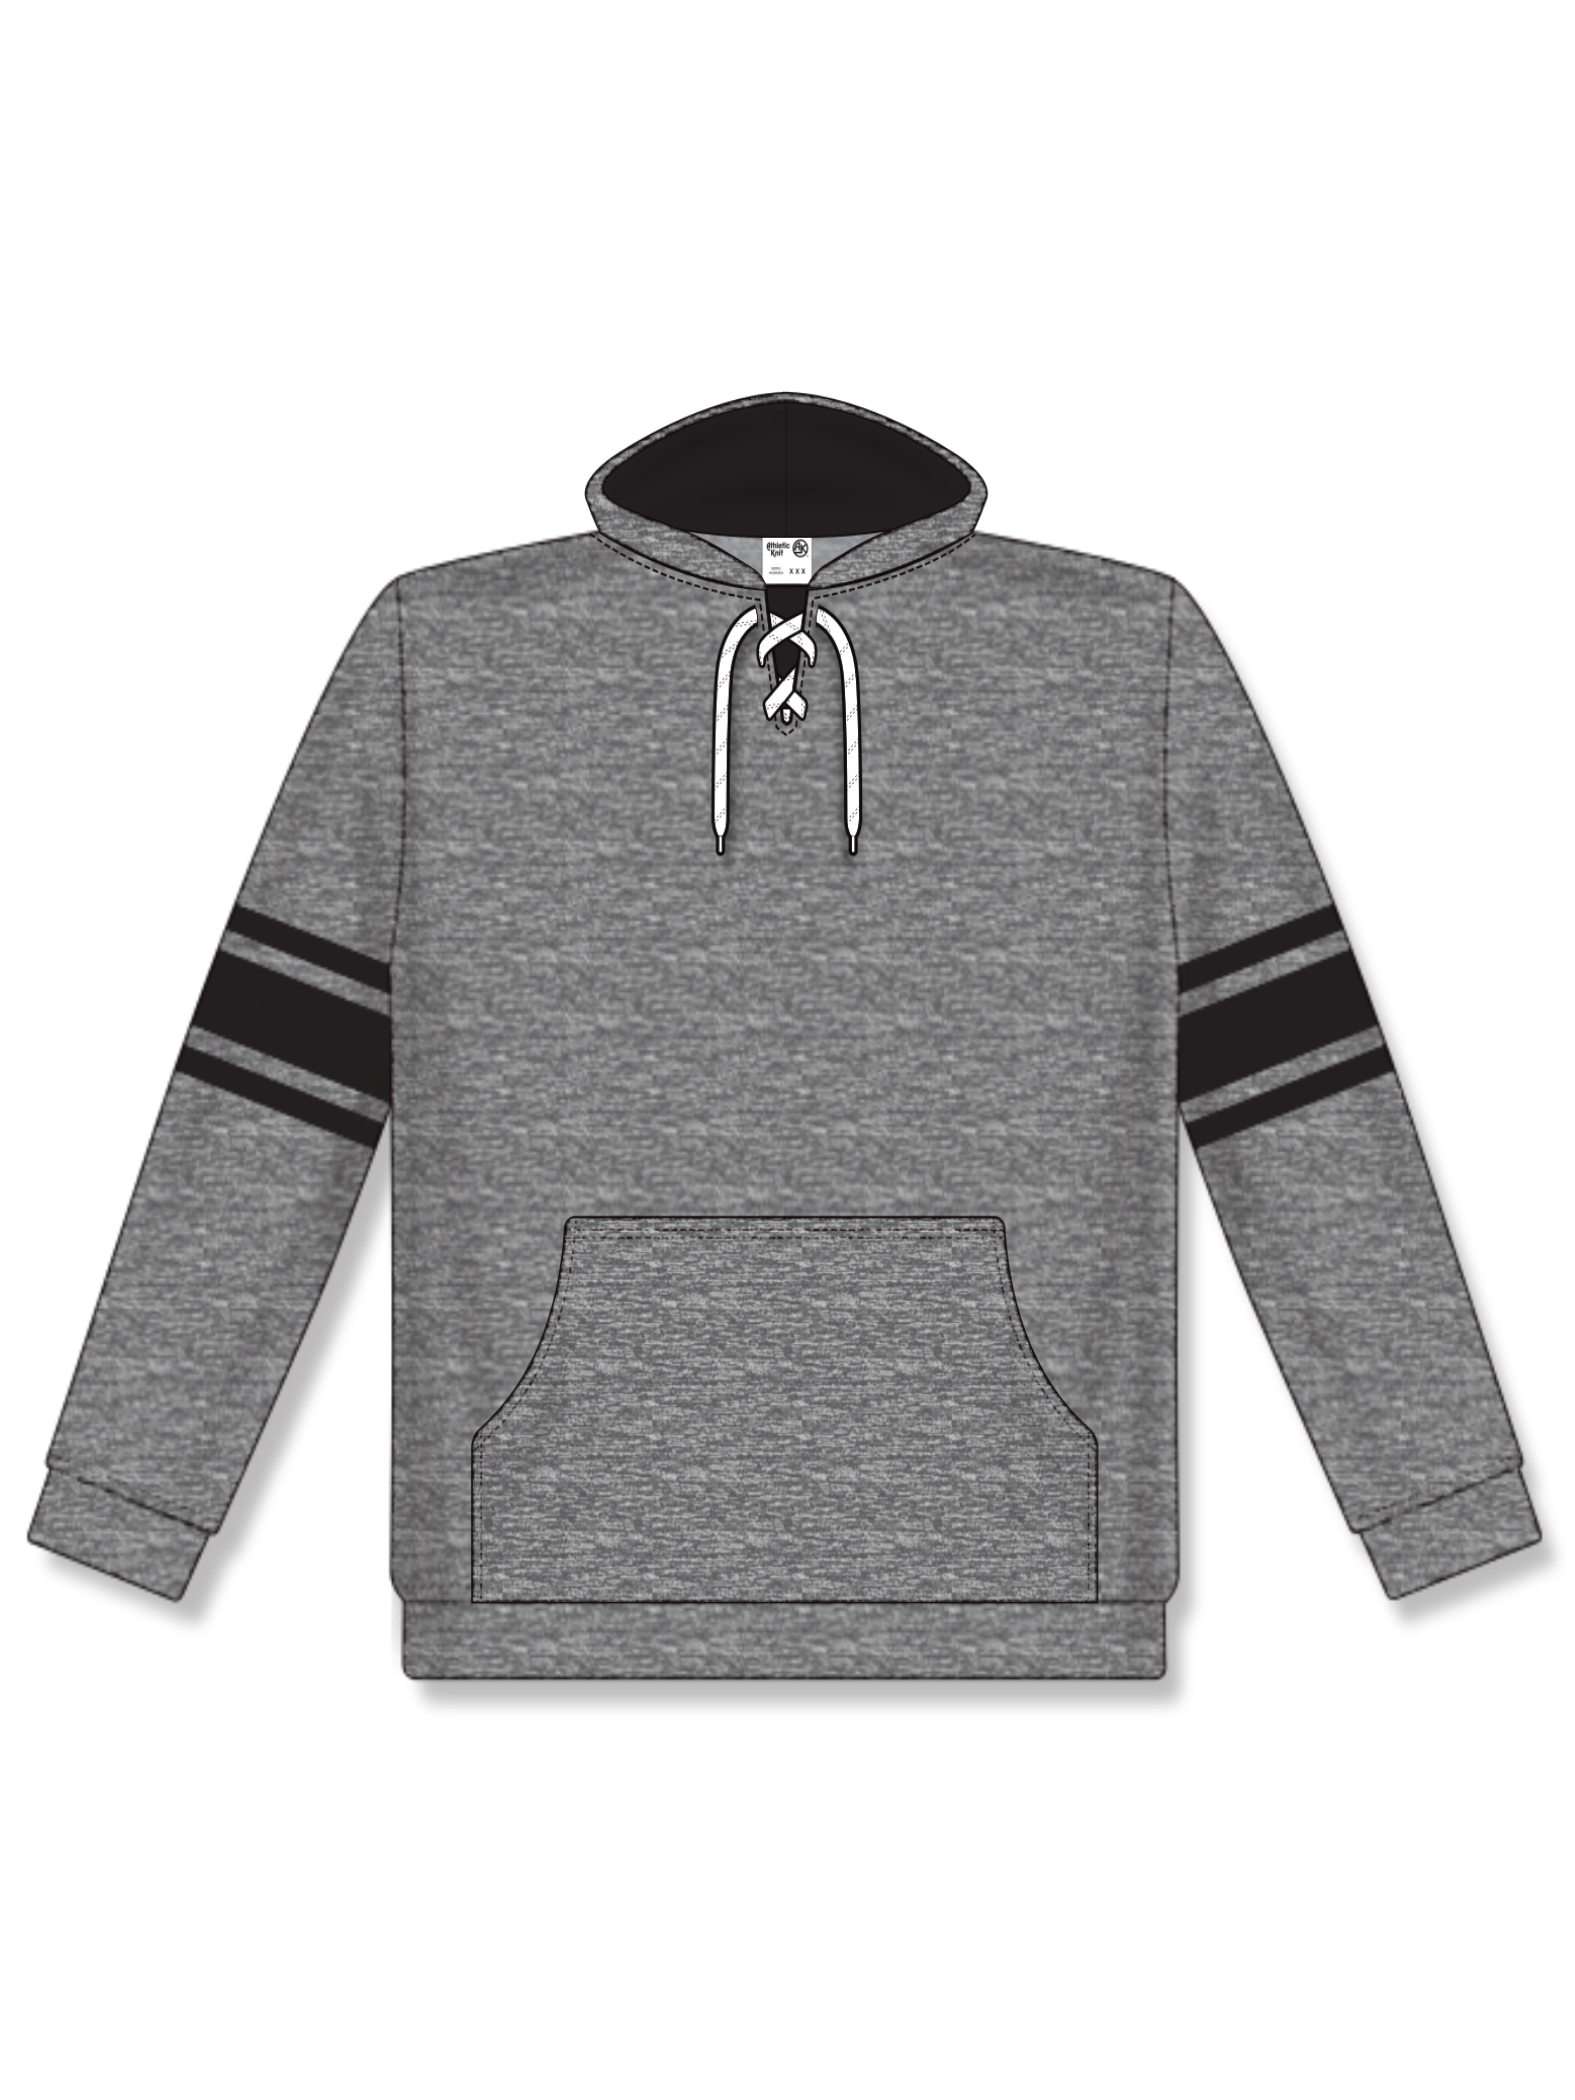 Performance Hoodie - Knoch - Multiple Colors Available